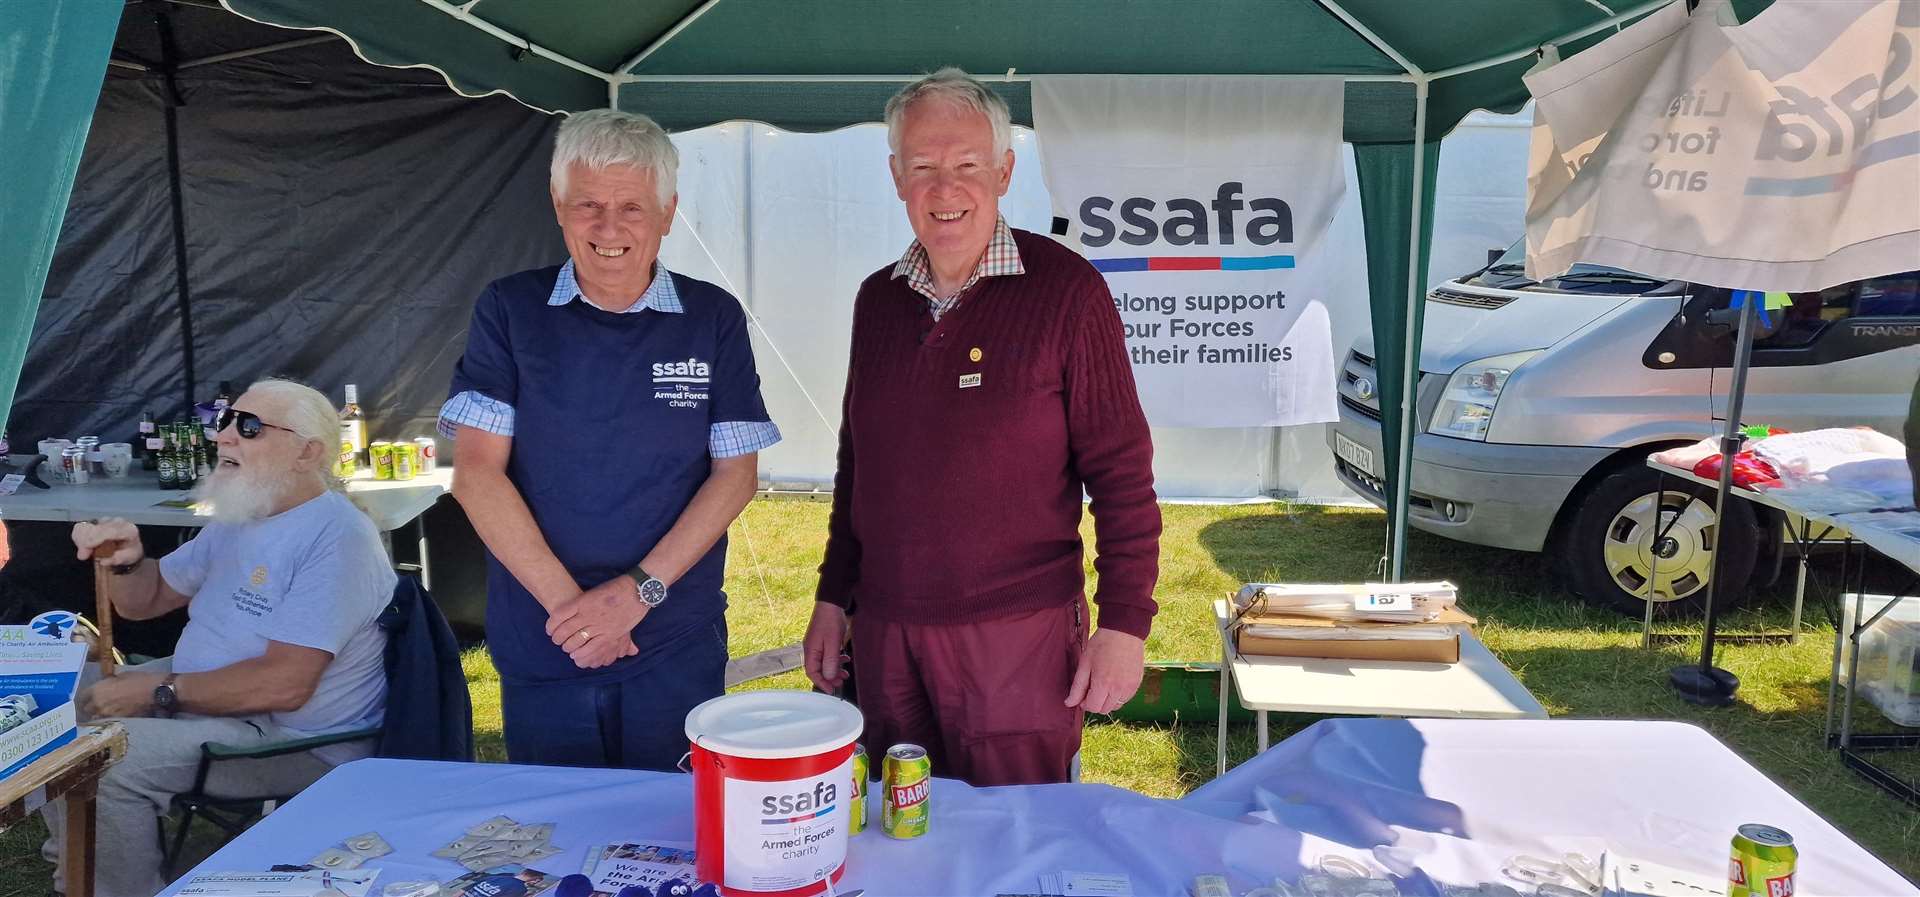 Rotary Club members and SSAFA committee members Alisdair Miller and Will Sutherland greeting show goers with a smile as they raised funds for their chosen charities.